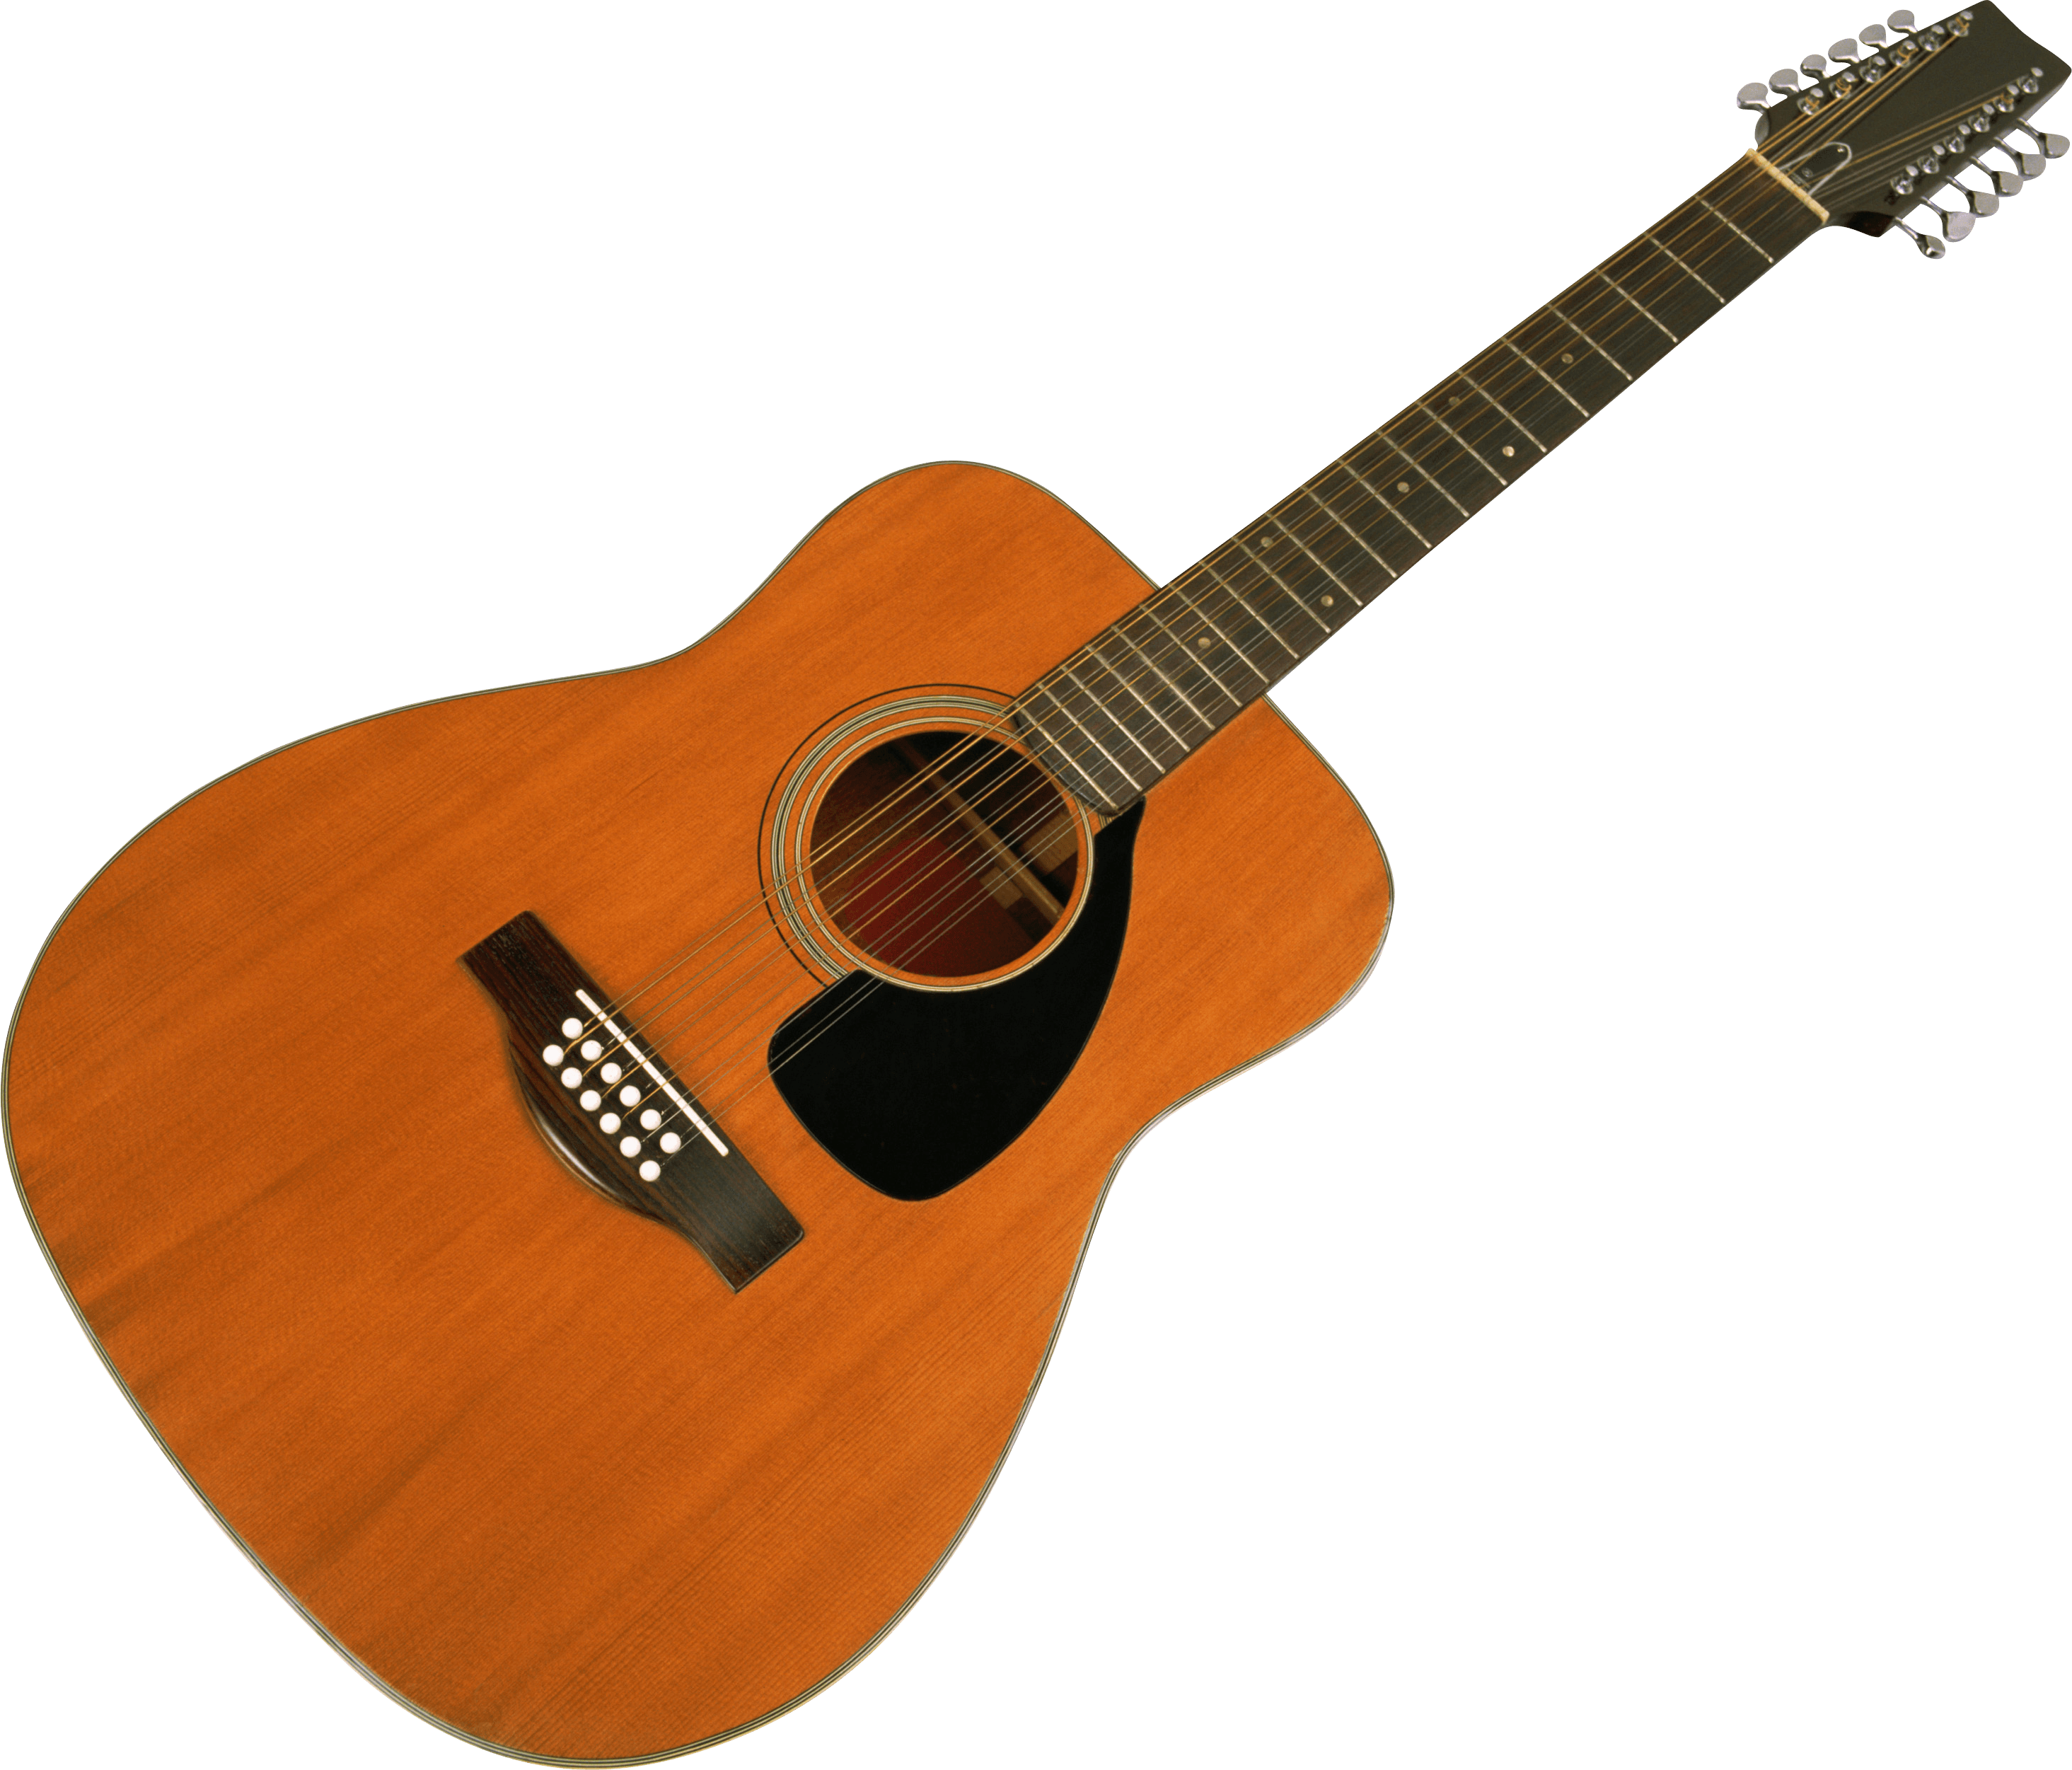 Guitar Instrument Chordophone Electric Musical PNG Image High Quality Clipart